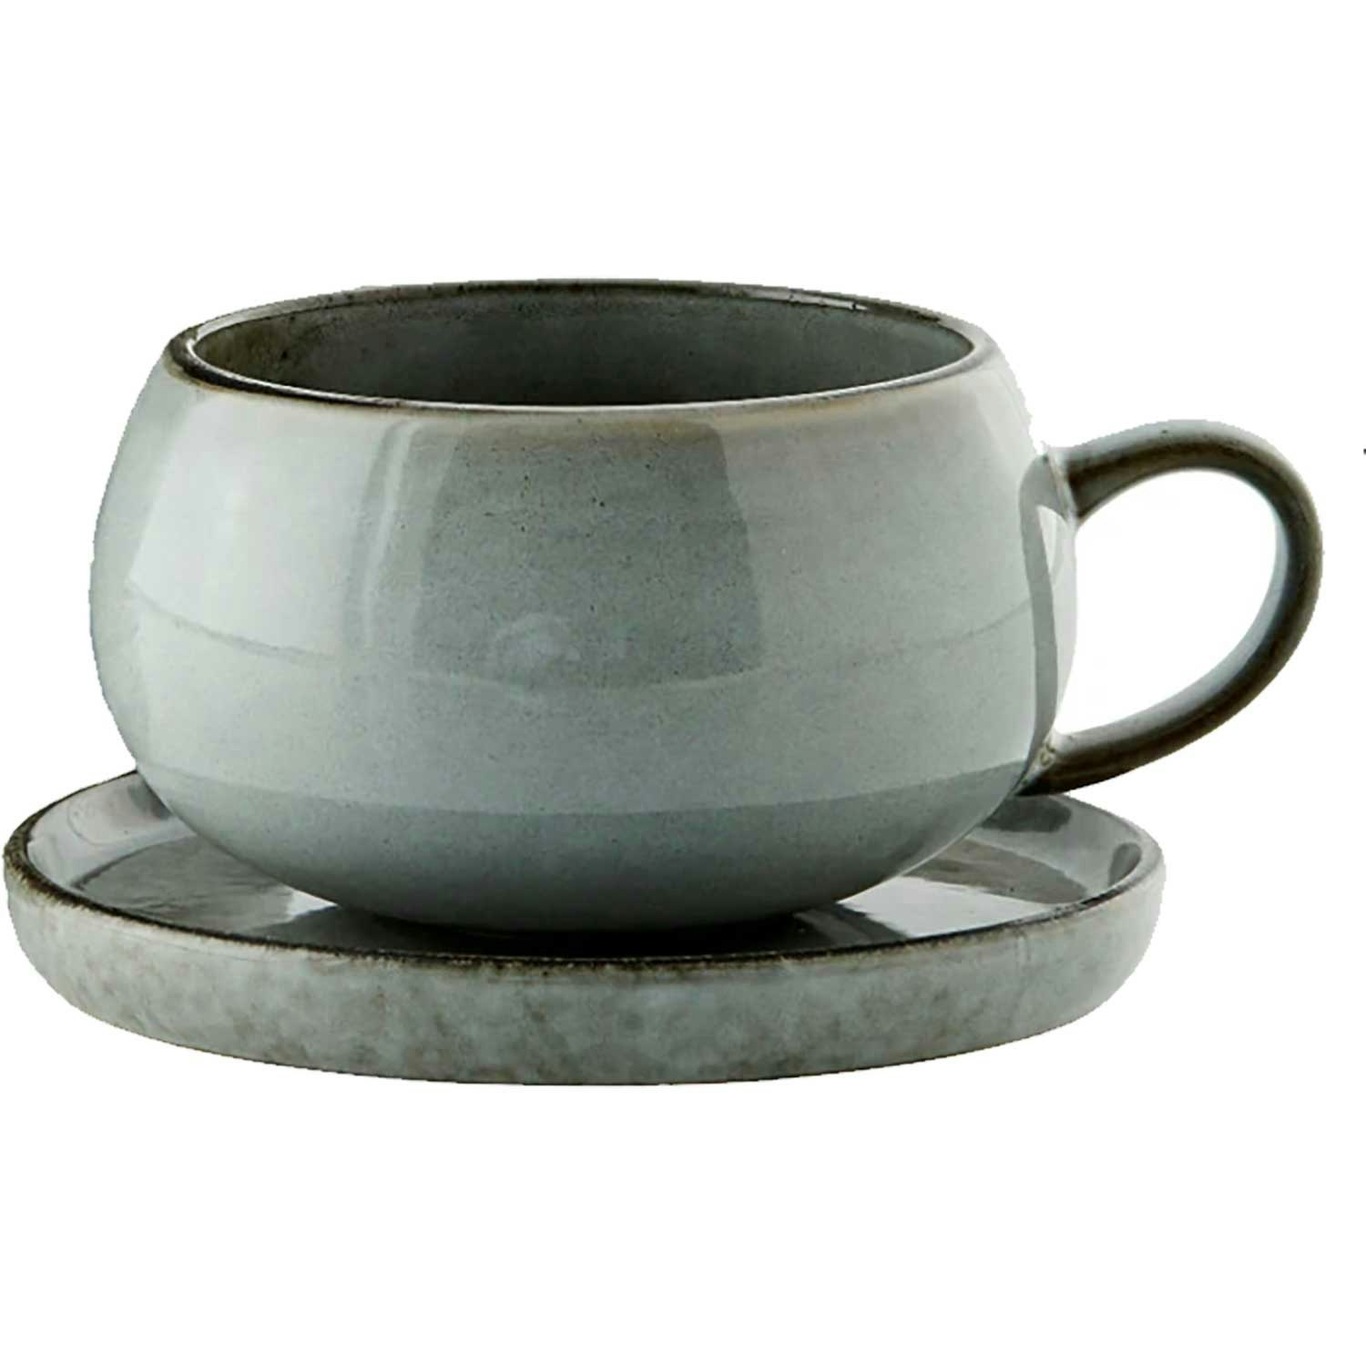 https://royaldesign.com/image/2/lene-bjerre-amera-cup-with-saucer-40cl-grey-7?w=800&quality=80